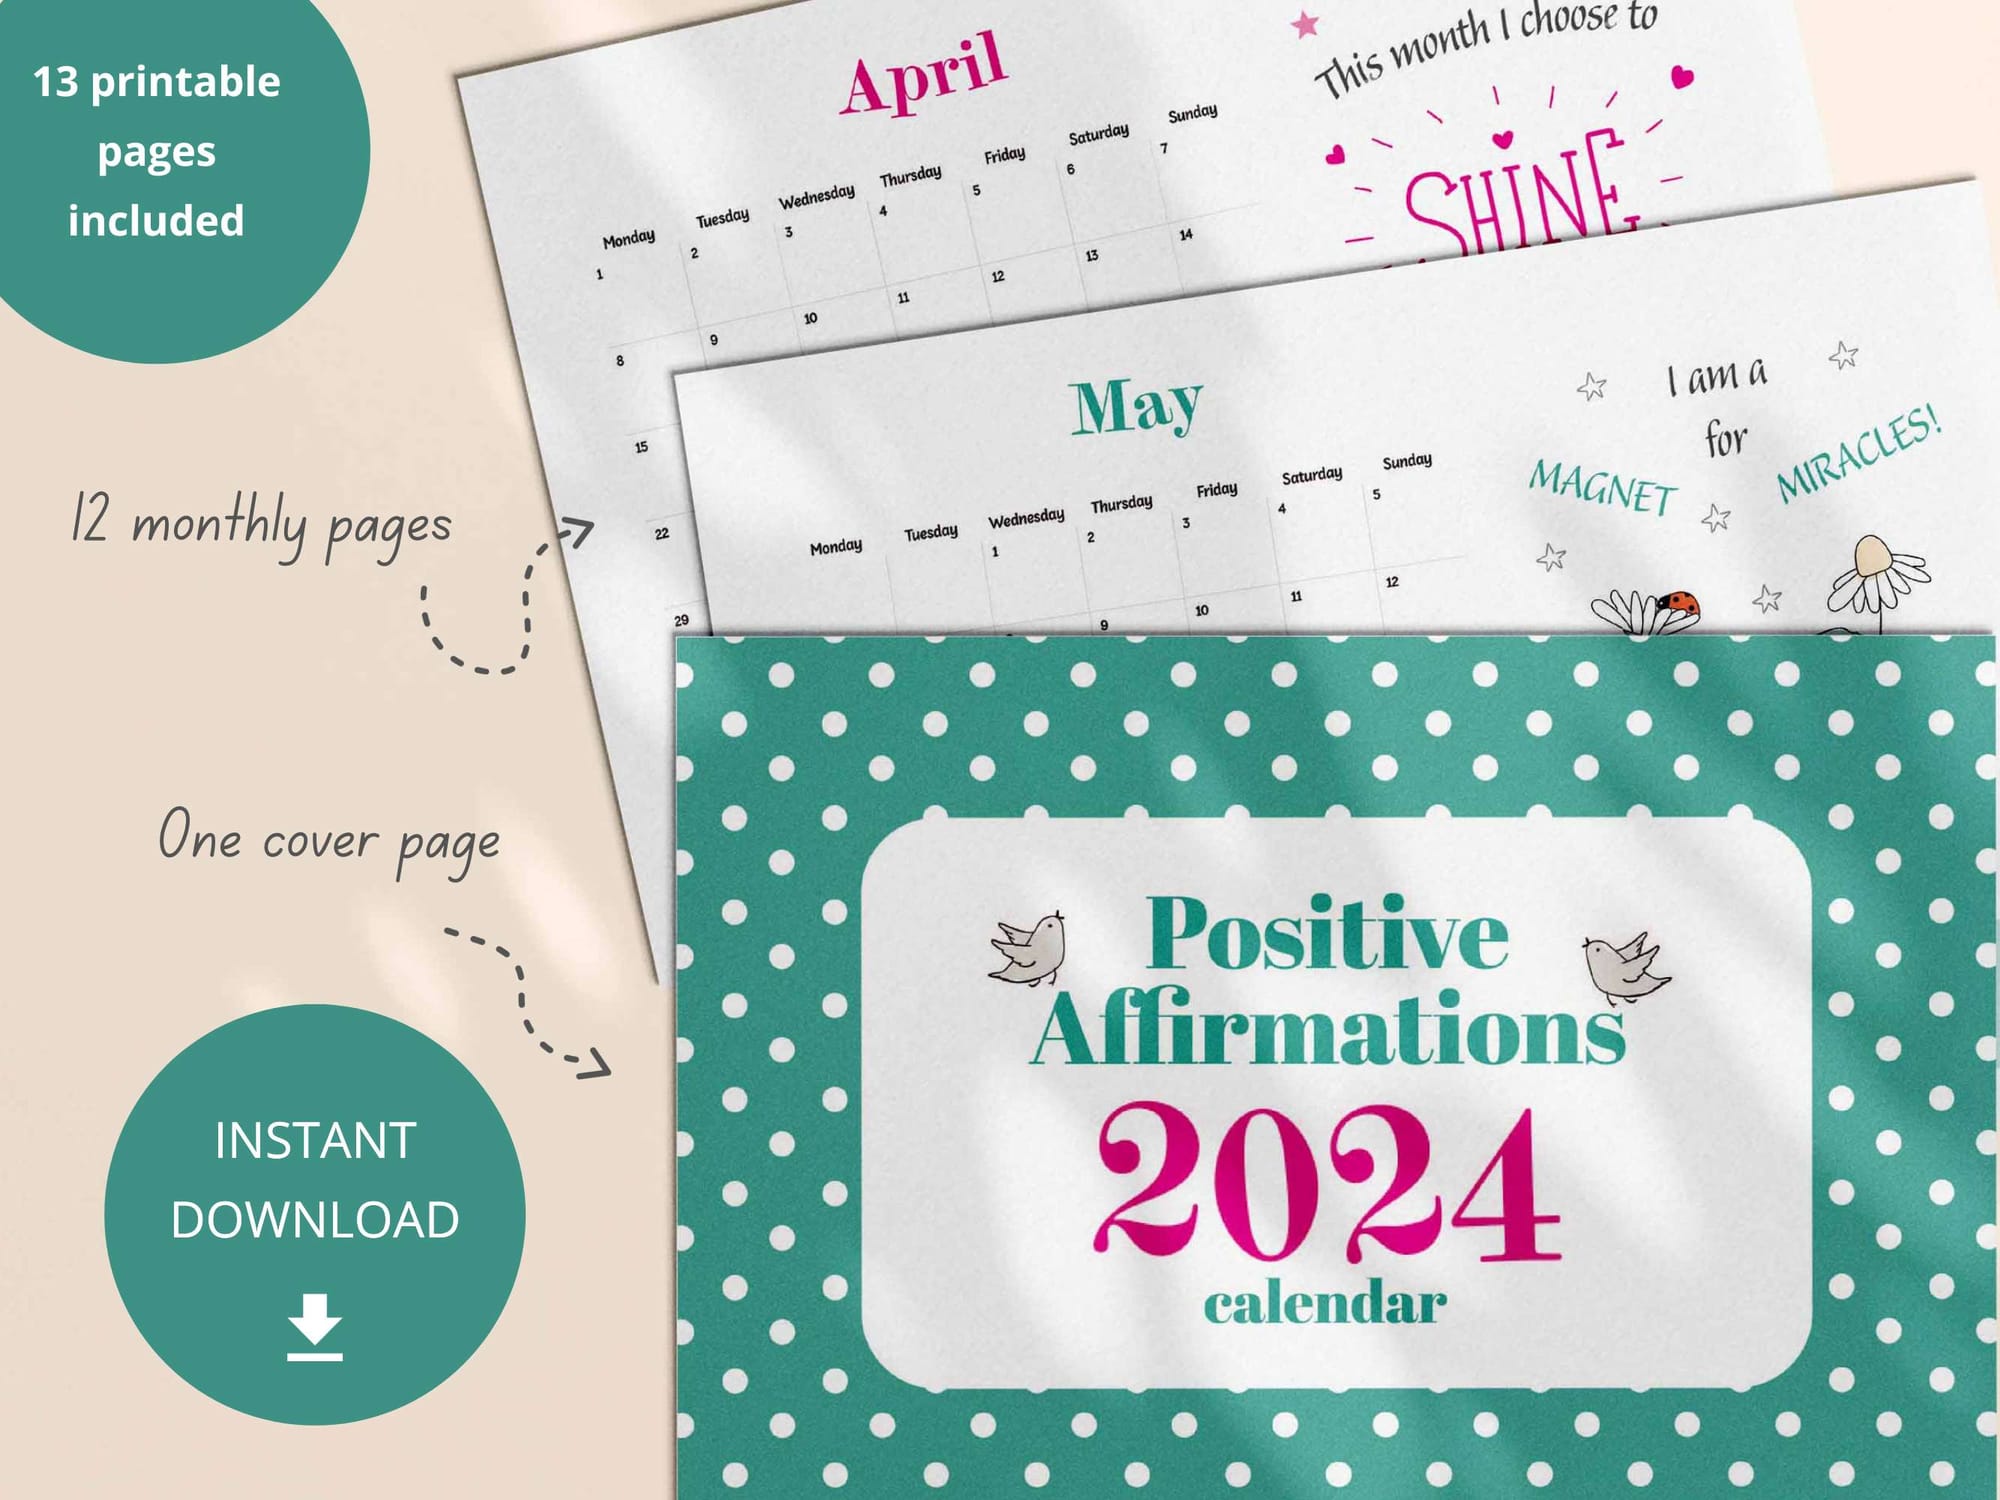 The calendar includes 13 printable pages in total - 12 monthly pages plus one cover page.